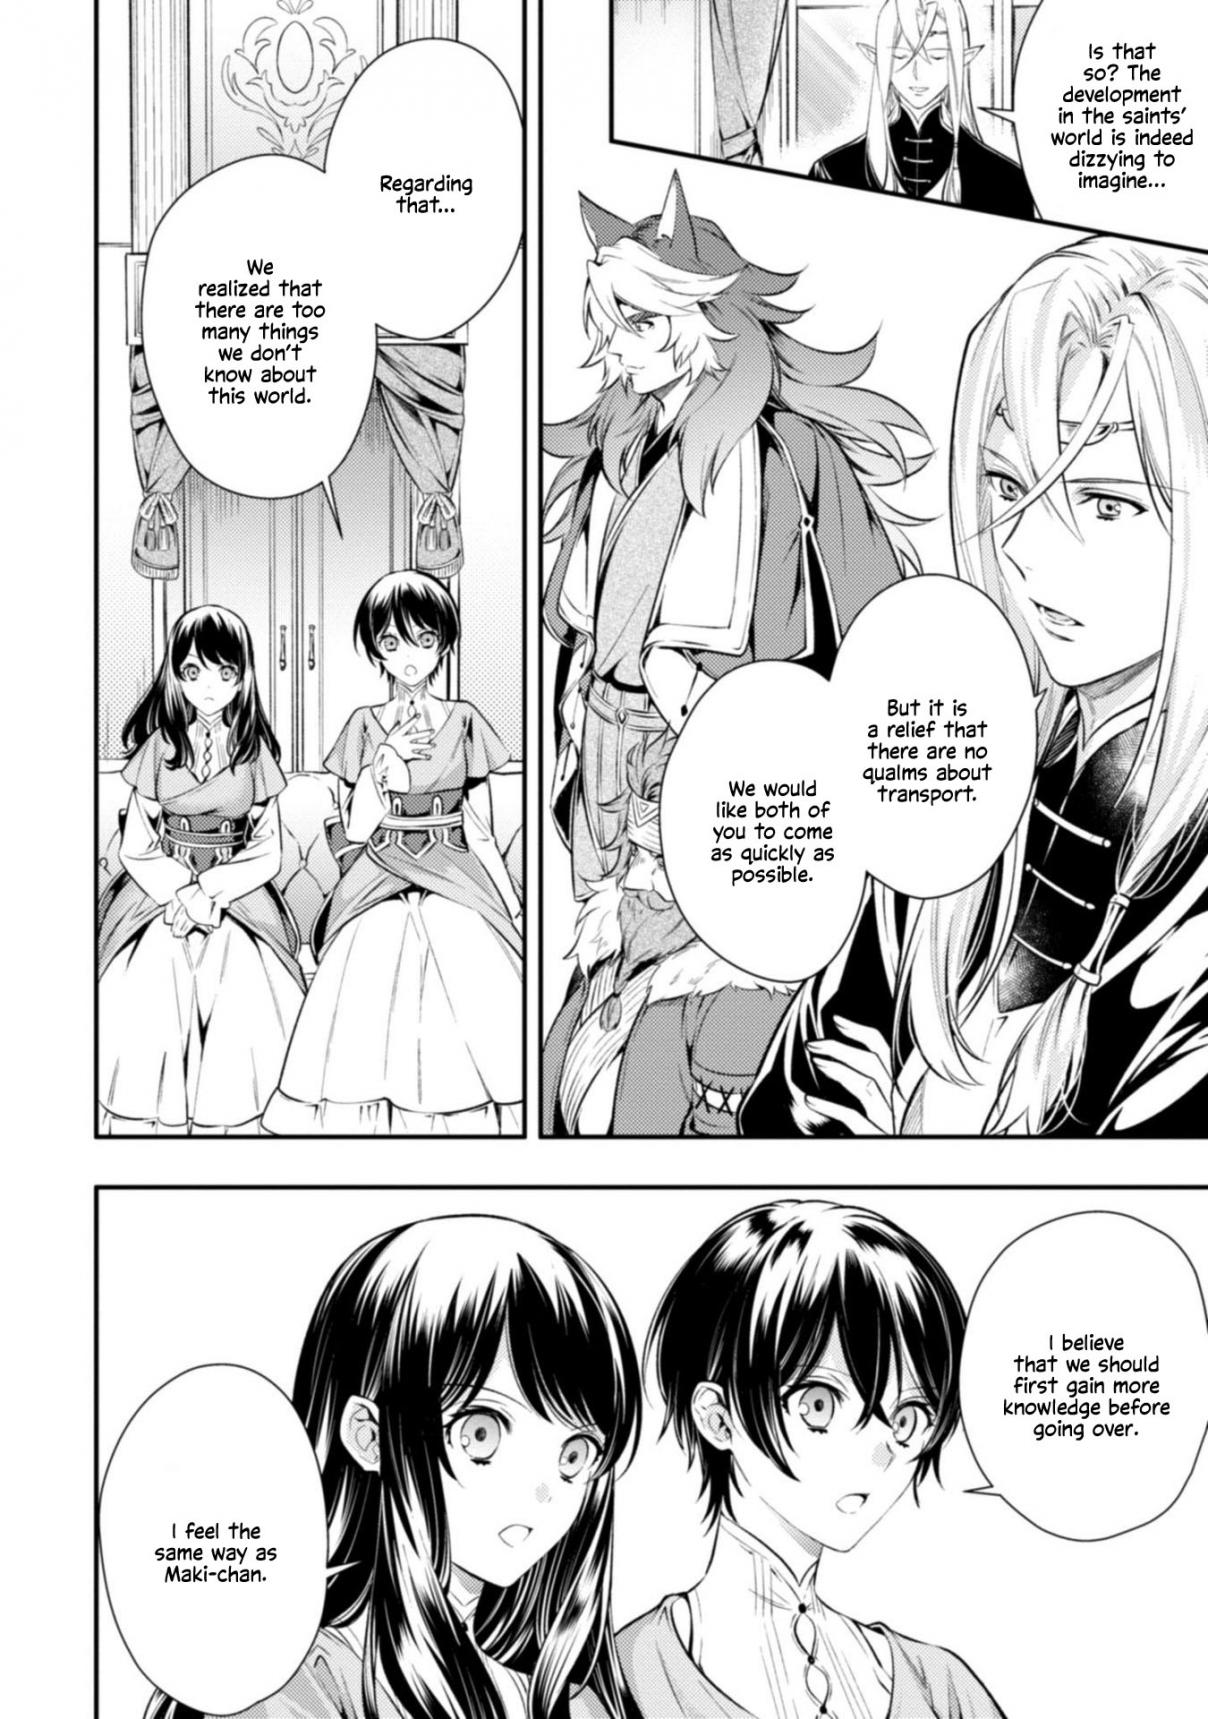 Two Saints Wander Off Into a Different World Vol. 1 Ch. 3